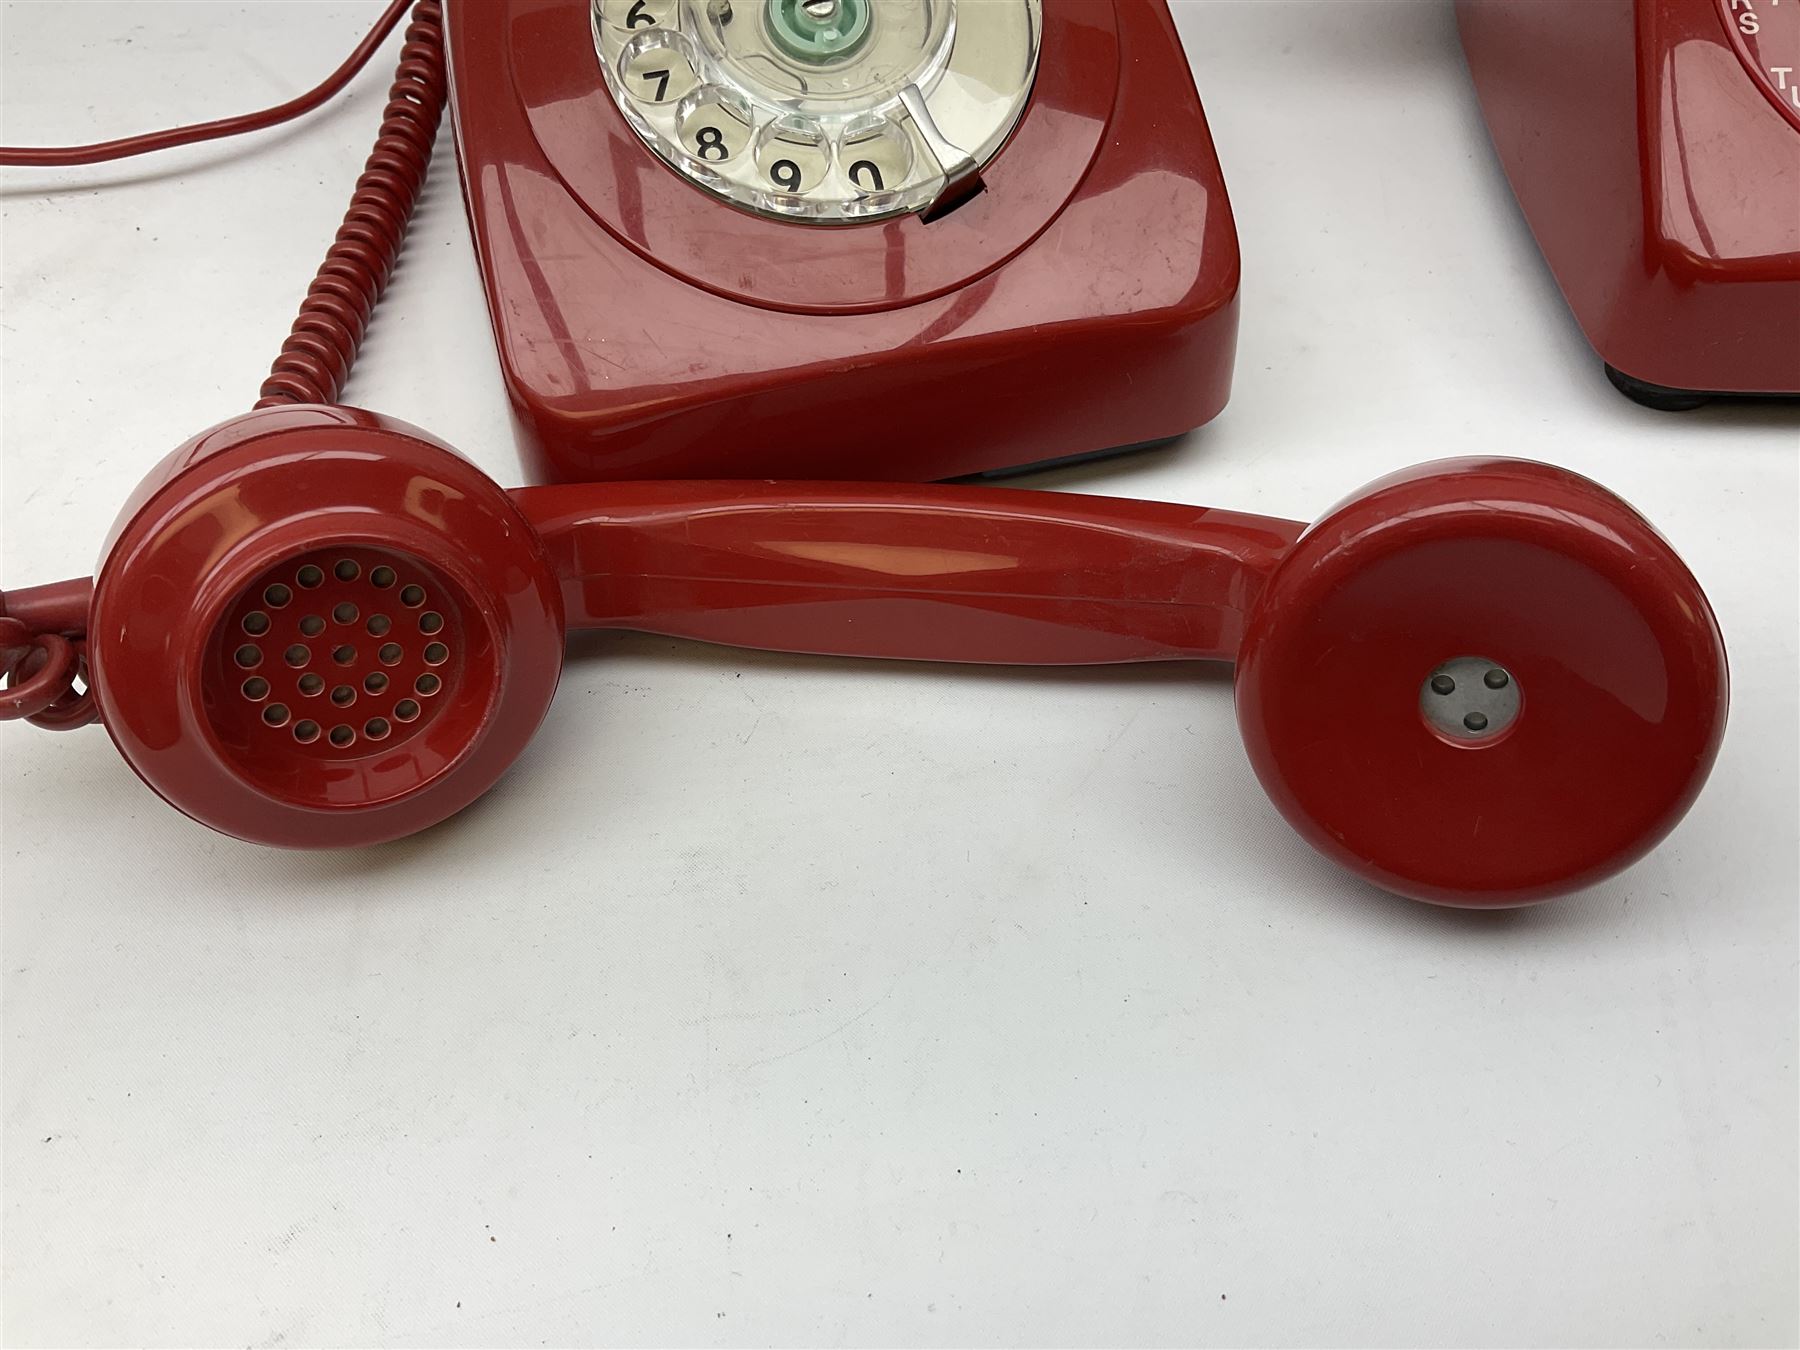 Two mid 19th century red telephones with rotary dials - Image 3 of 10